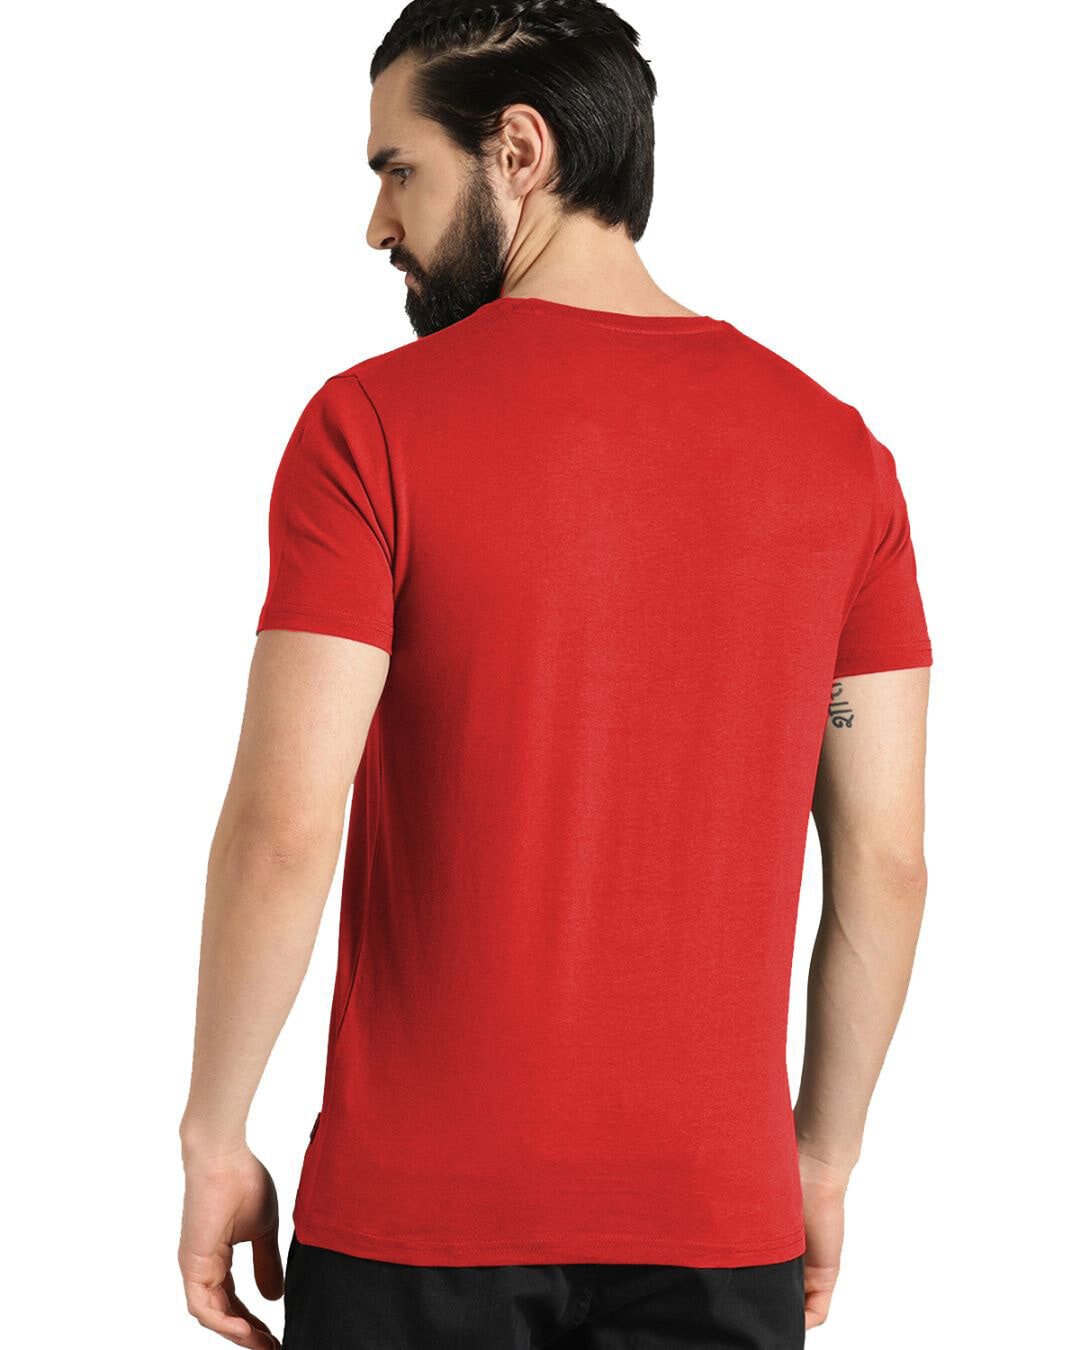 Shop Graphic Printed T-shirt for Men's-Back